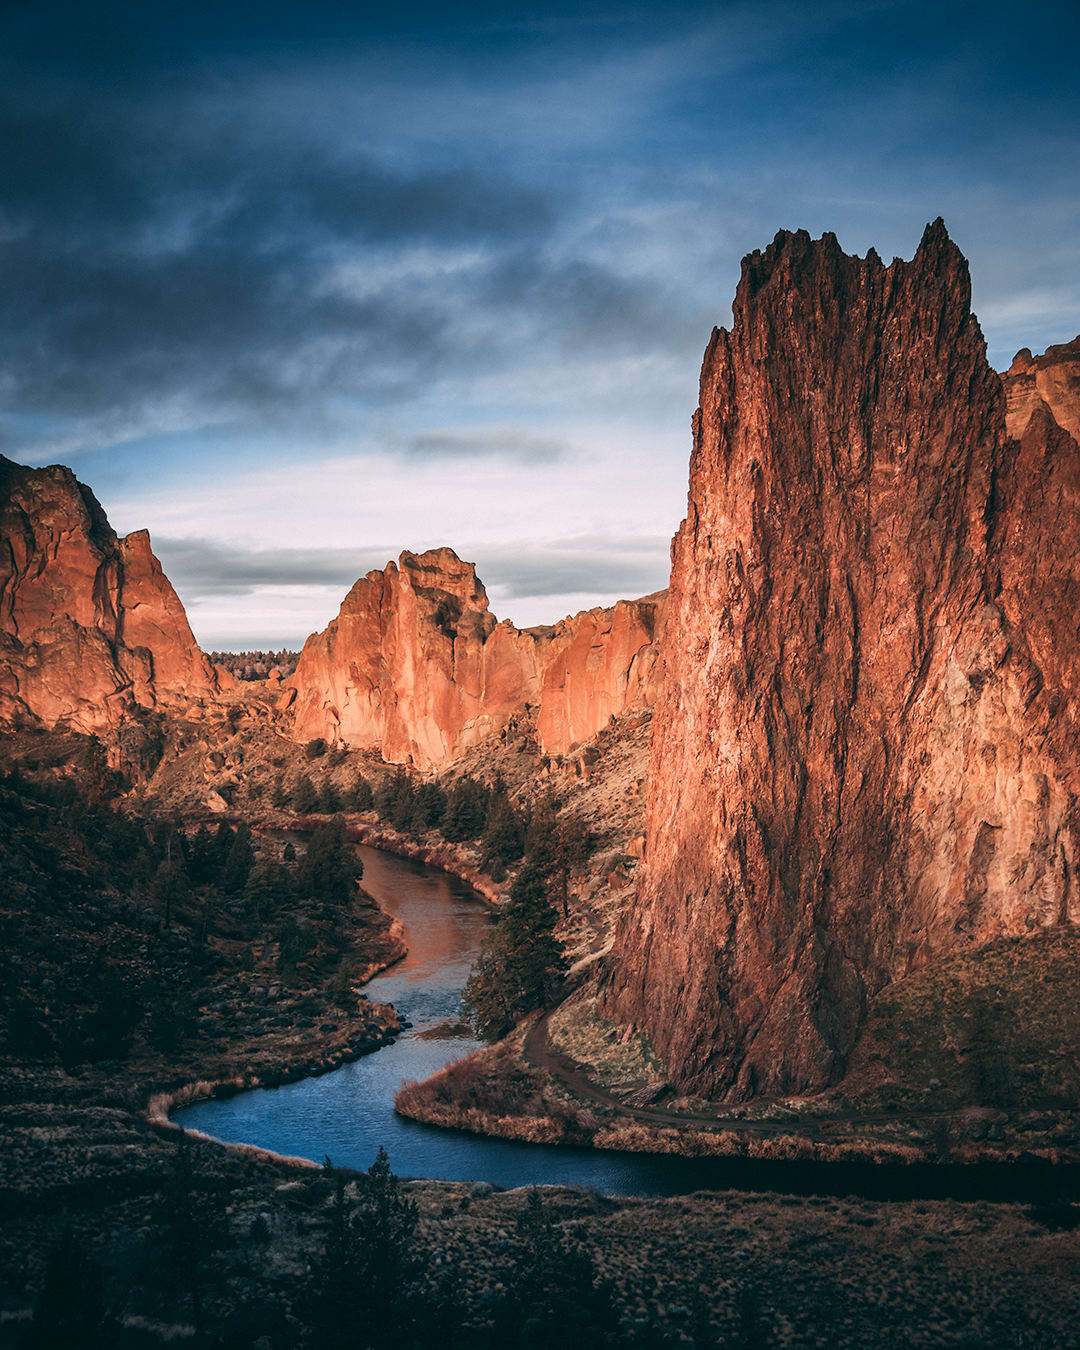 Was practicing my photo skills before the craziness started. Here's a shot of one of my favorite places to climb (Smith Rock)